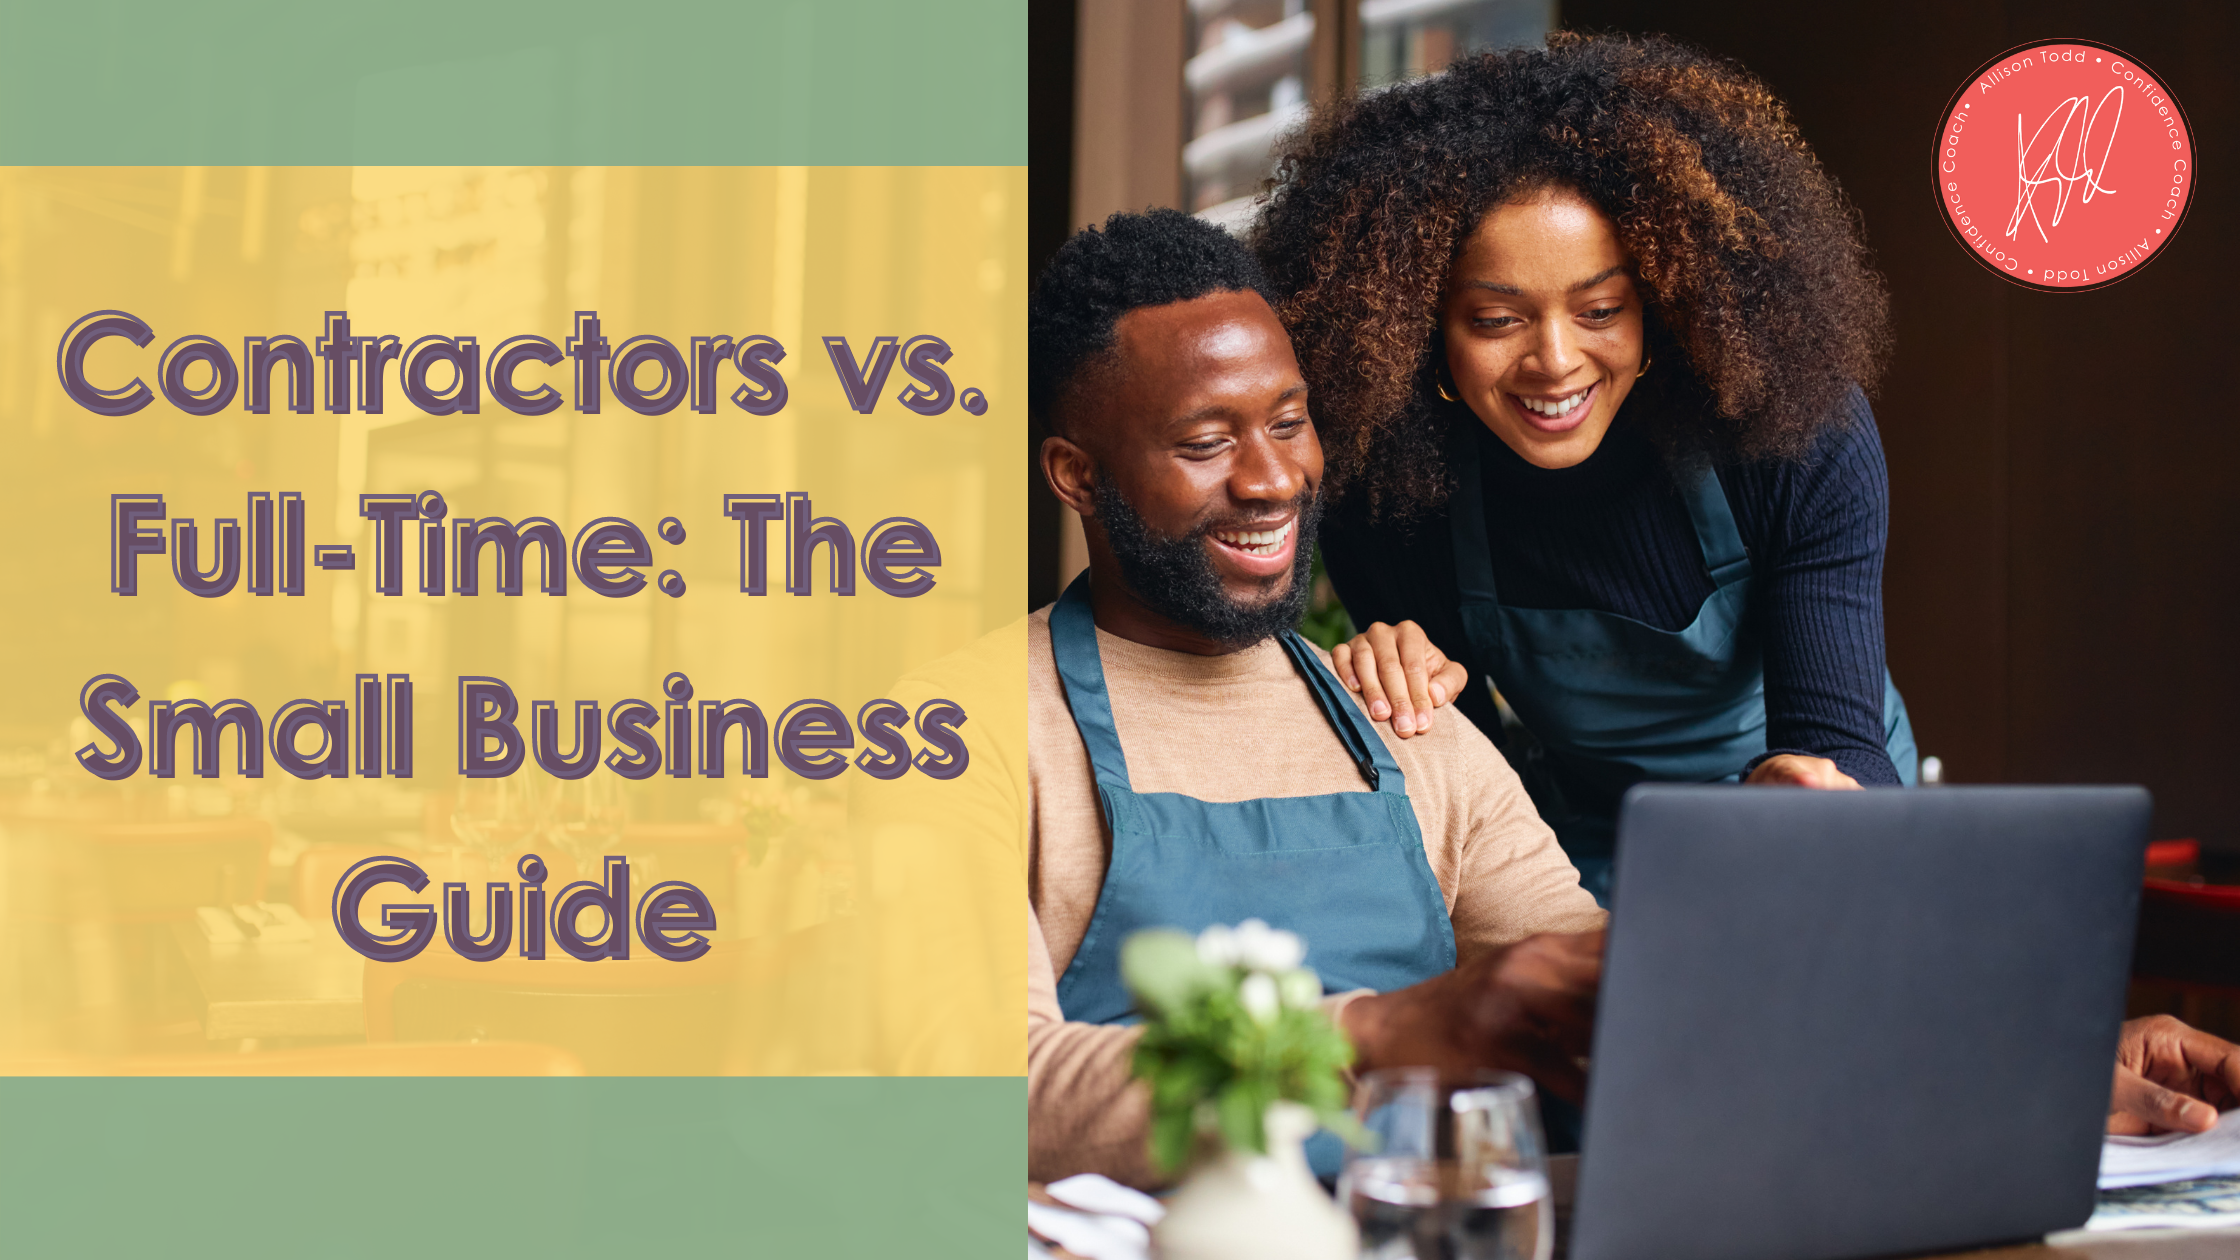 Contractors vs. Full-Time: The Small Business Guide